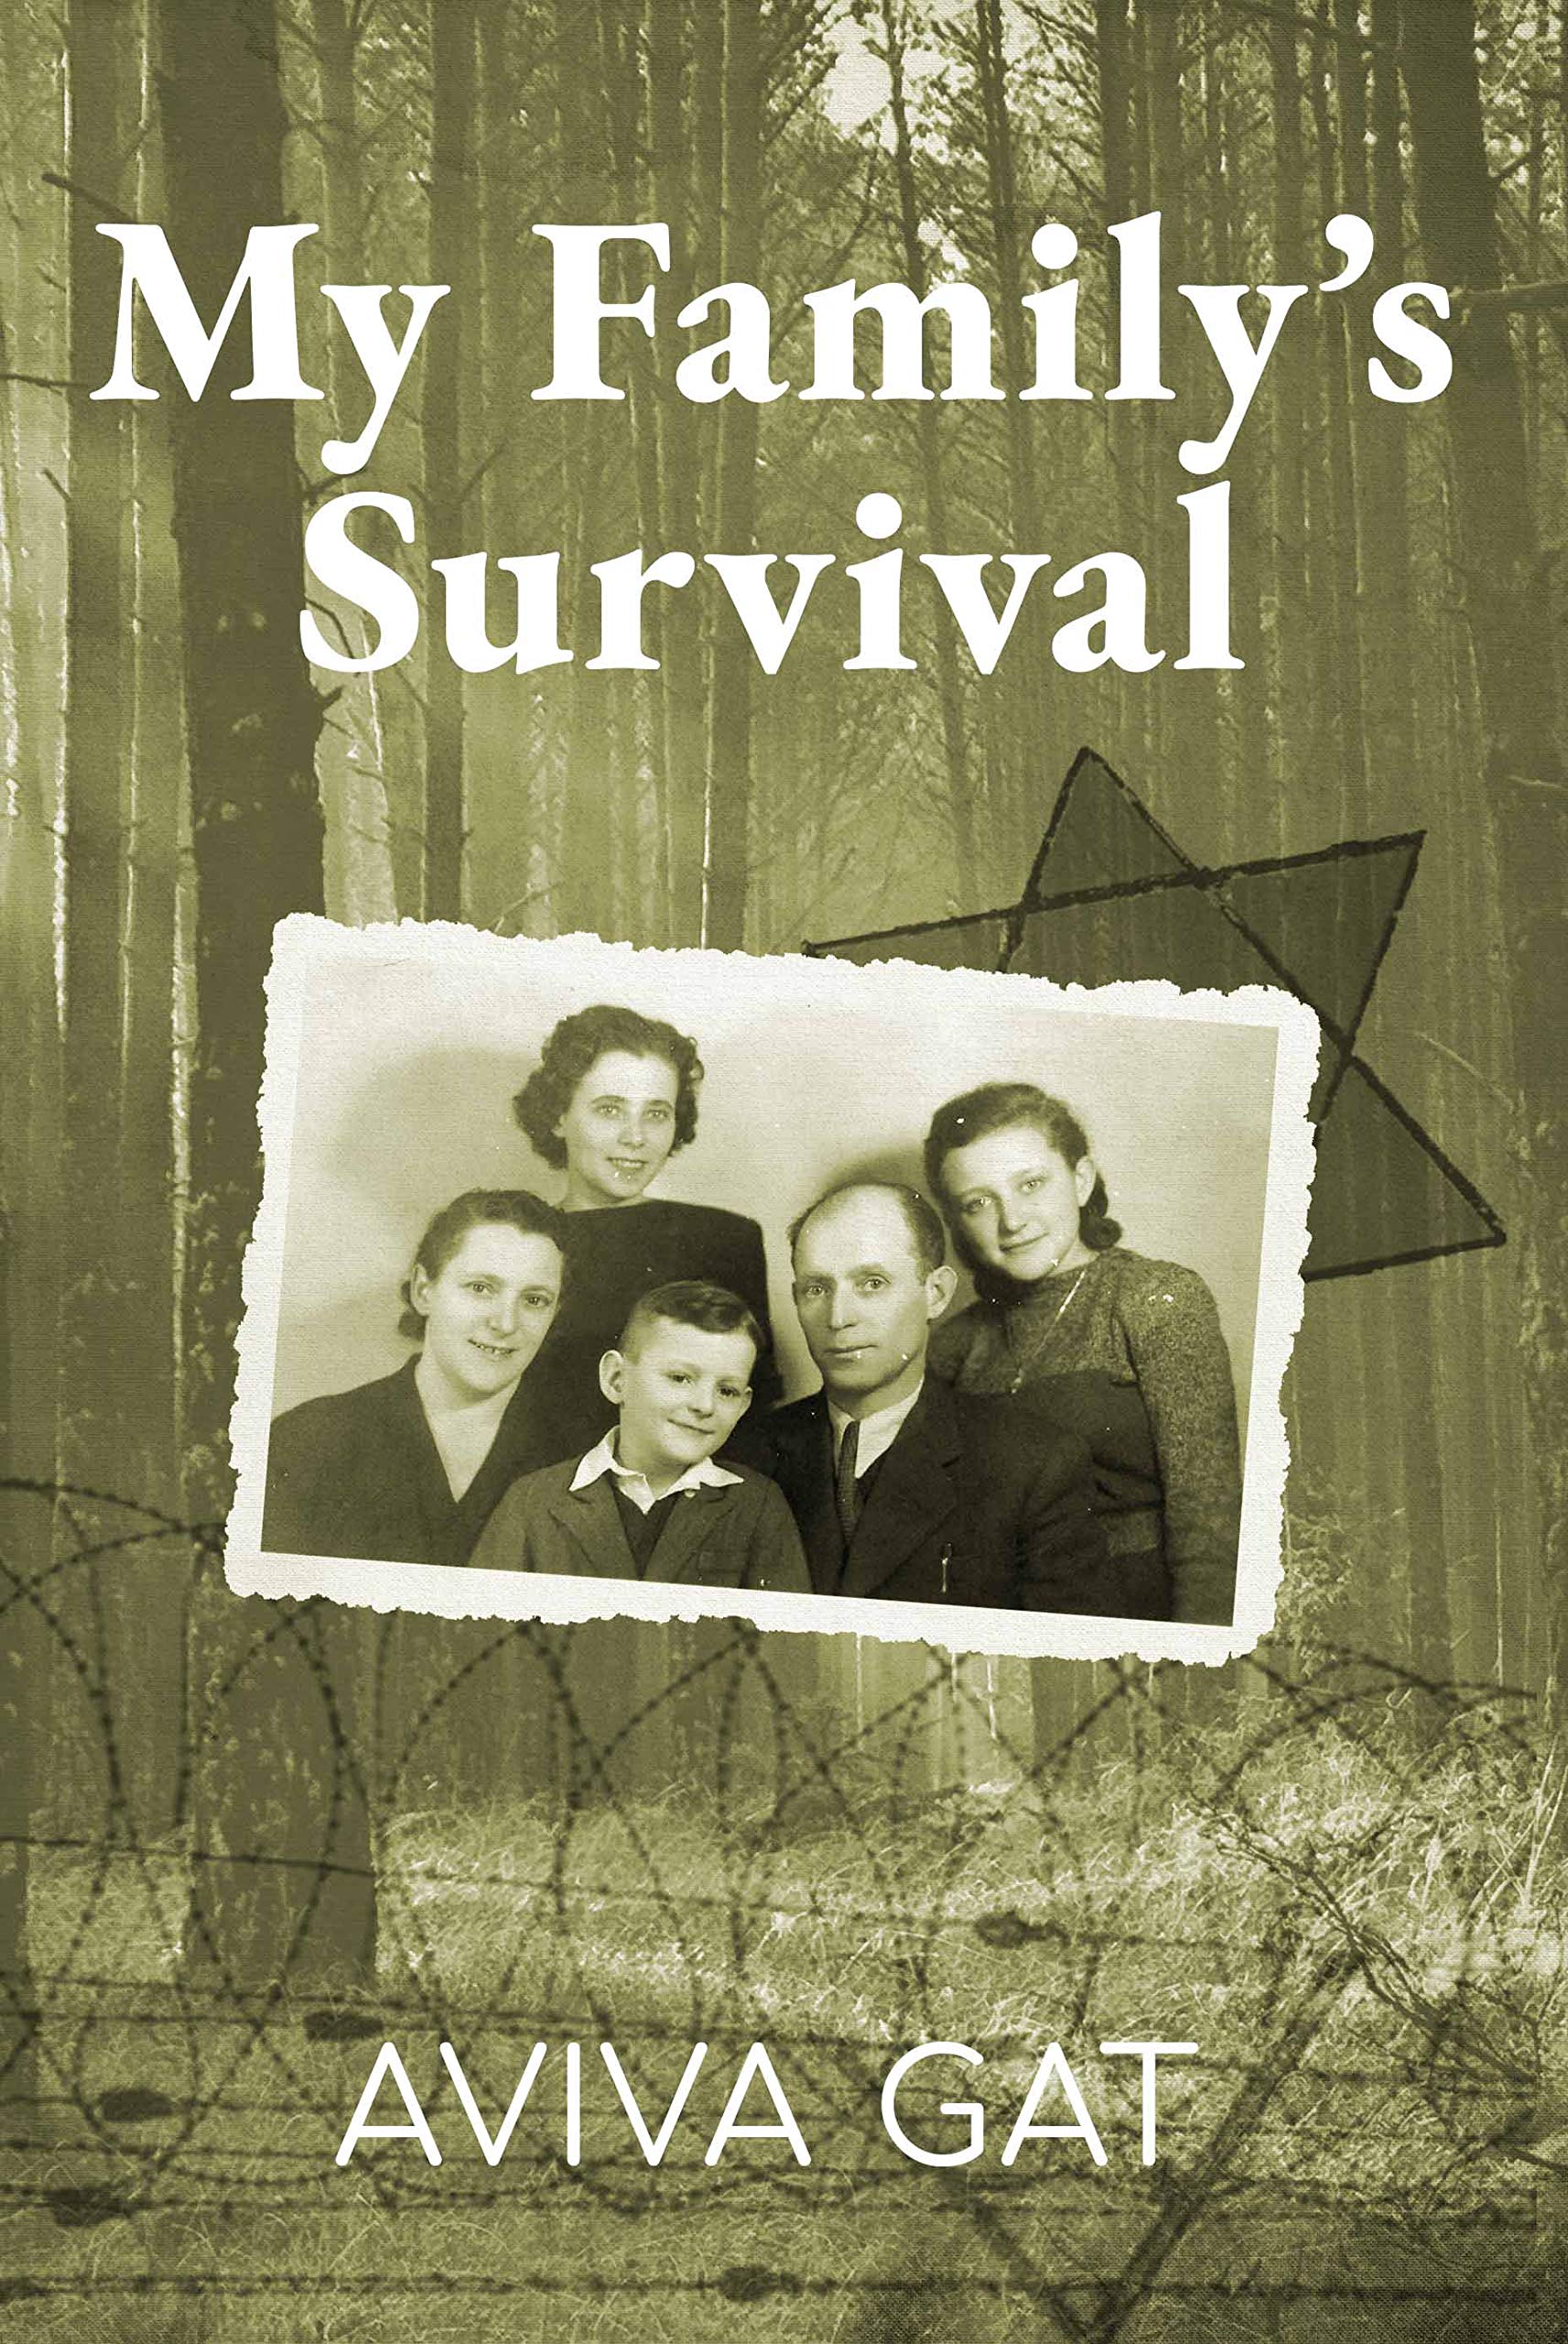 Book Cover My Family's Survival: The true story of how the Shwartz family escaped the Nazis and survived the Holocaust